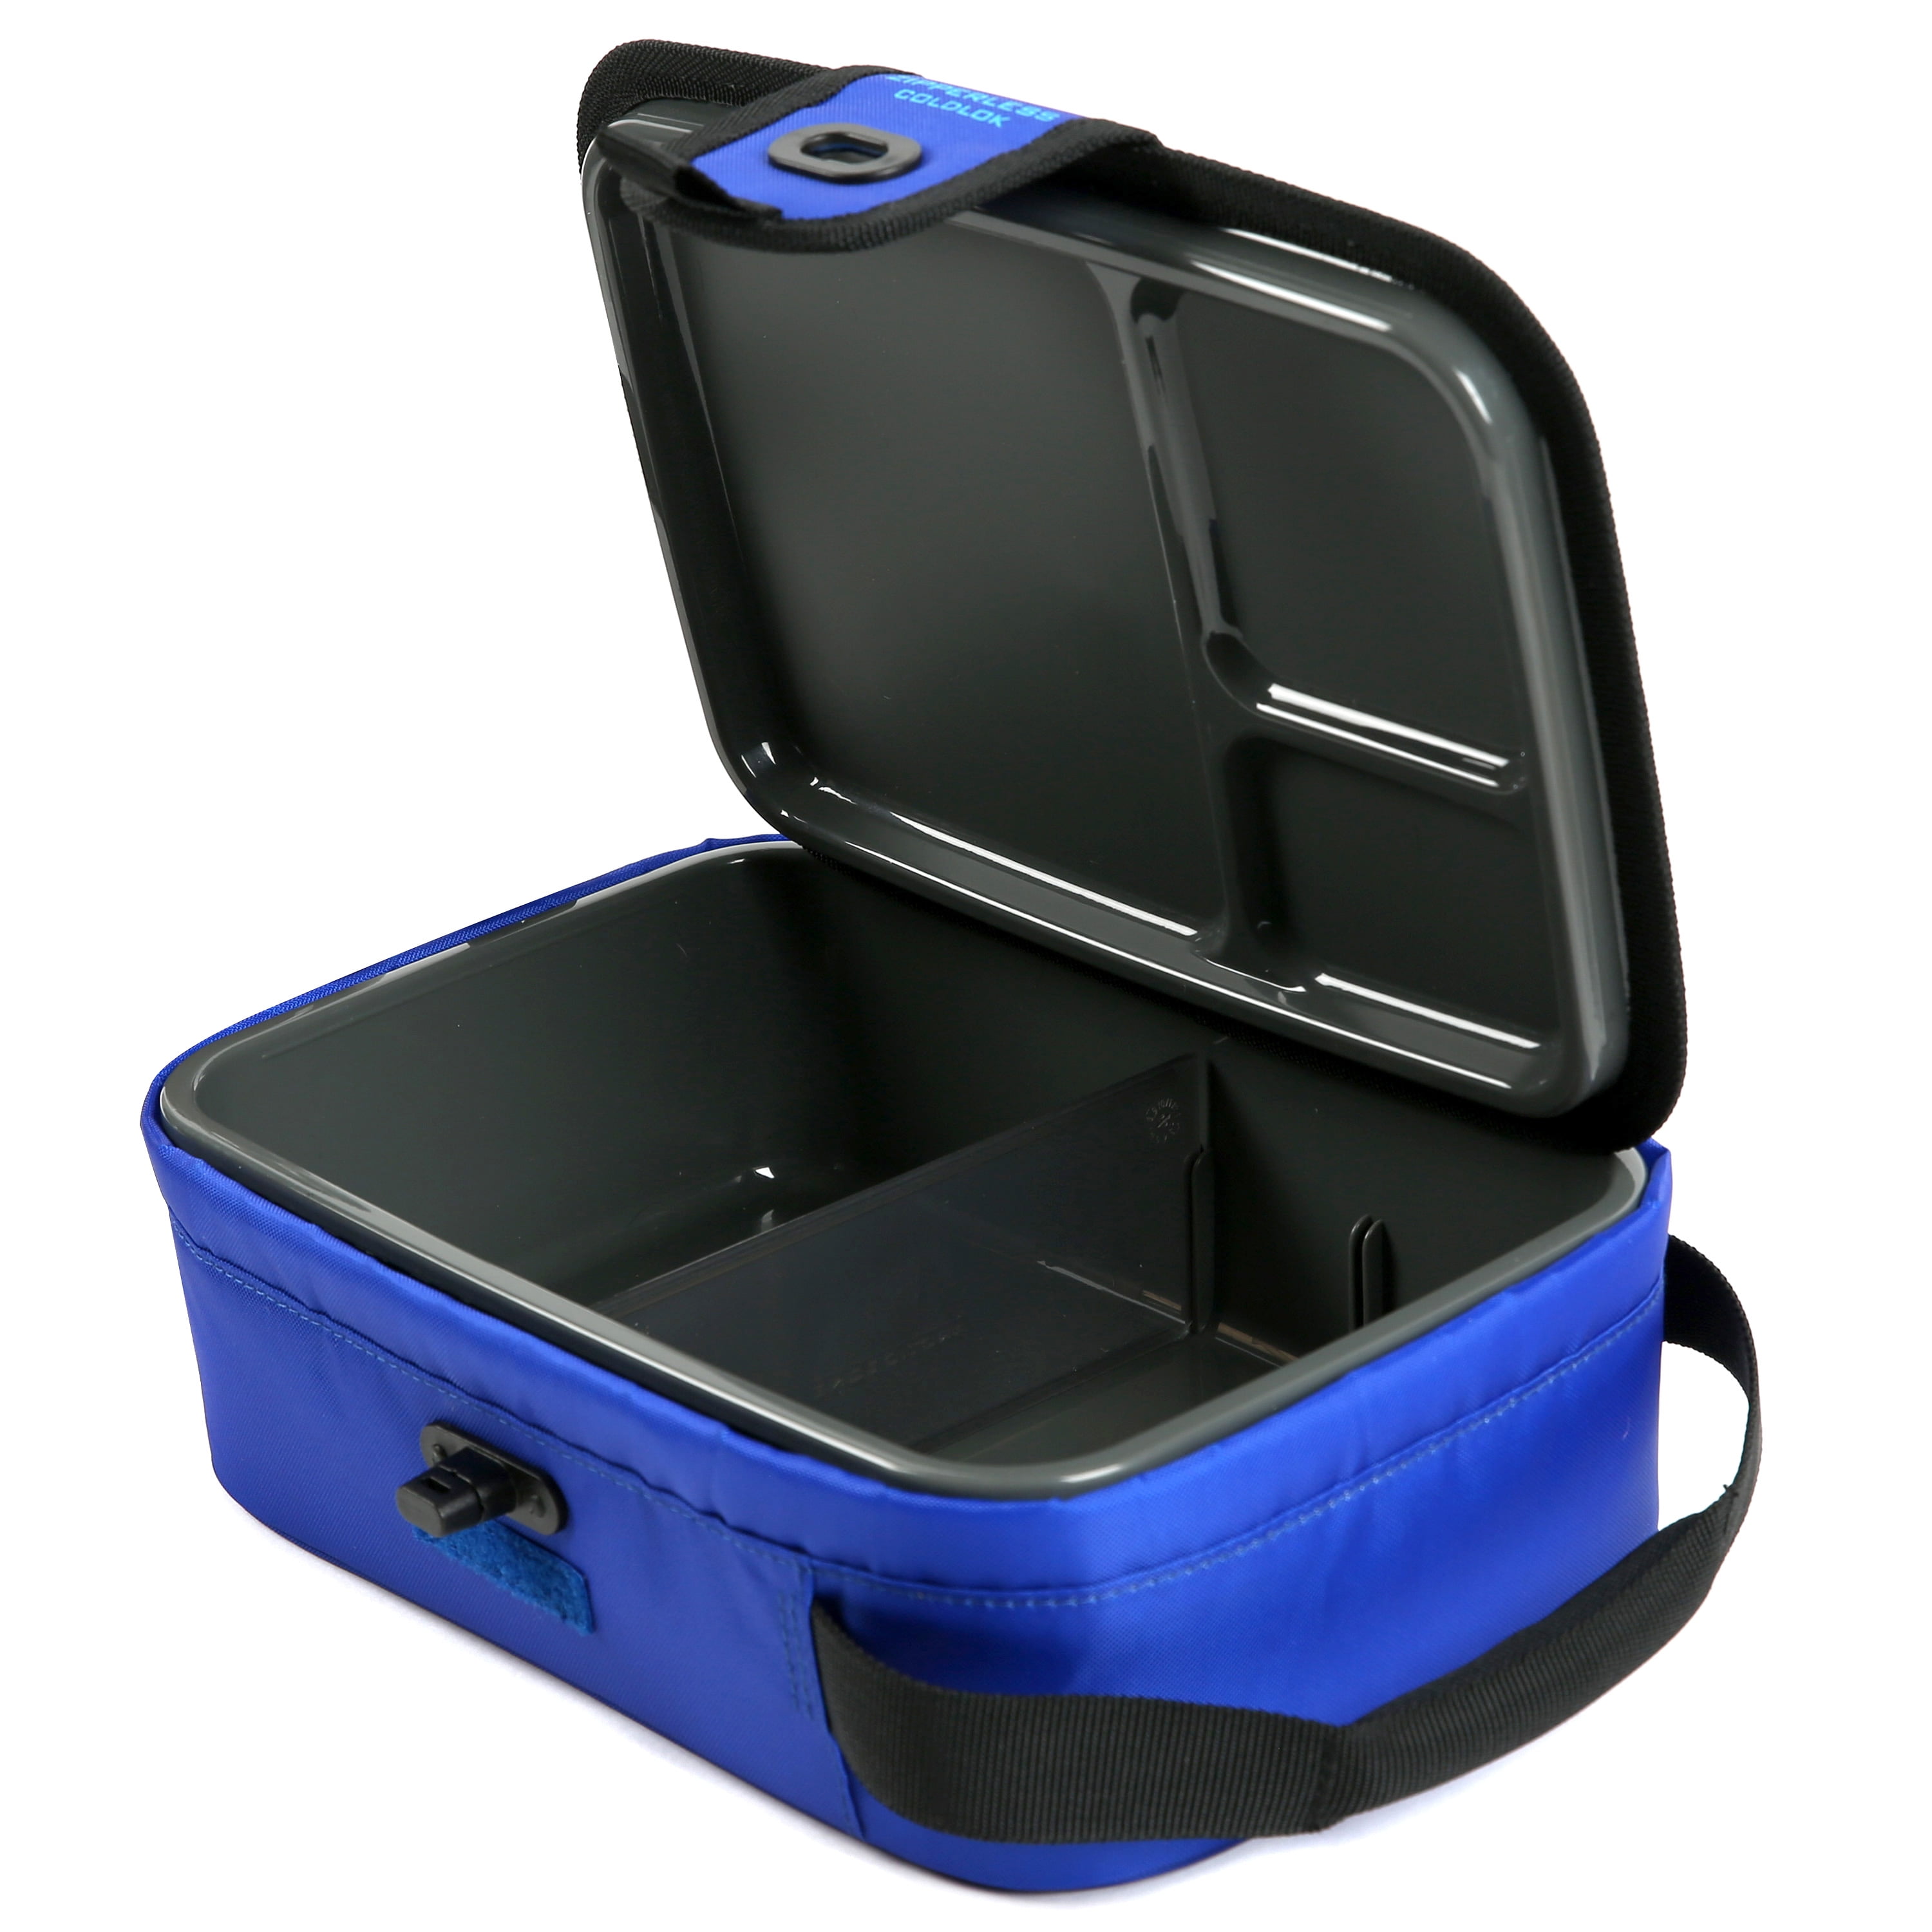 Arctic Zone Zipperless Lunch Box with Thermal Insulation, Blue 